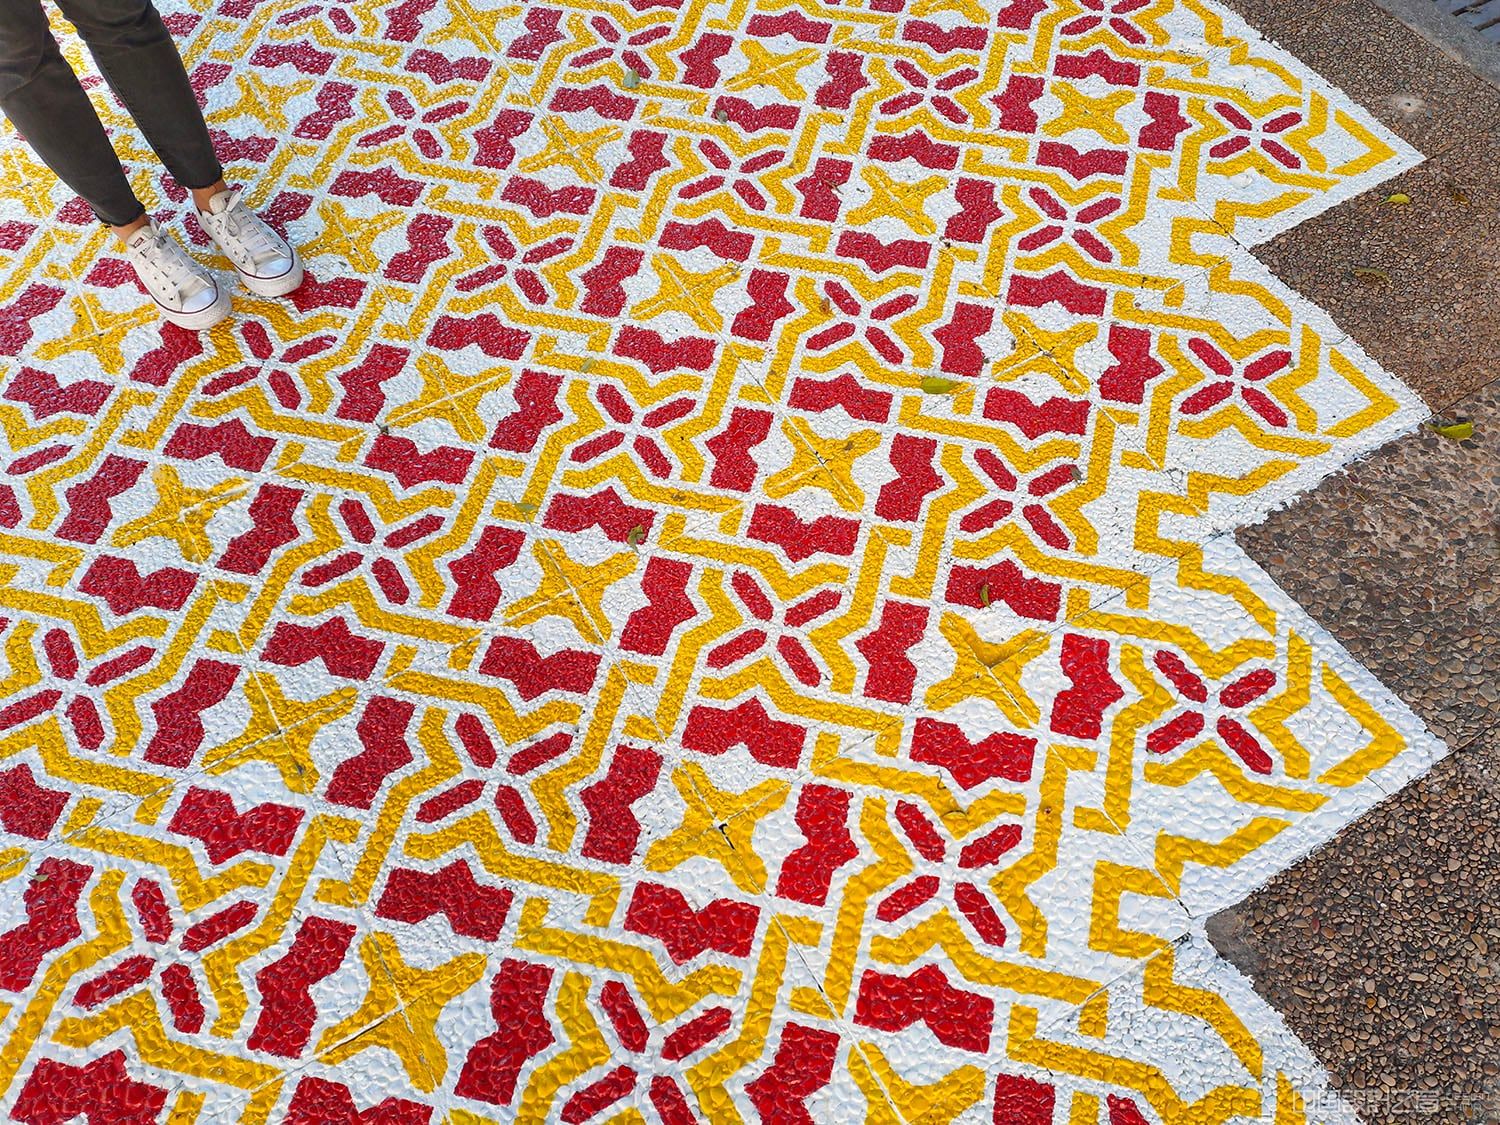 A detail photo of a vibrant patterned rug-like intervention painted on the co<em></em>ncrete in a city